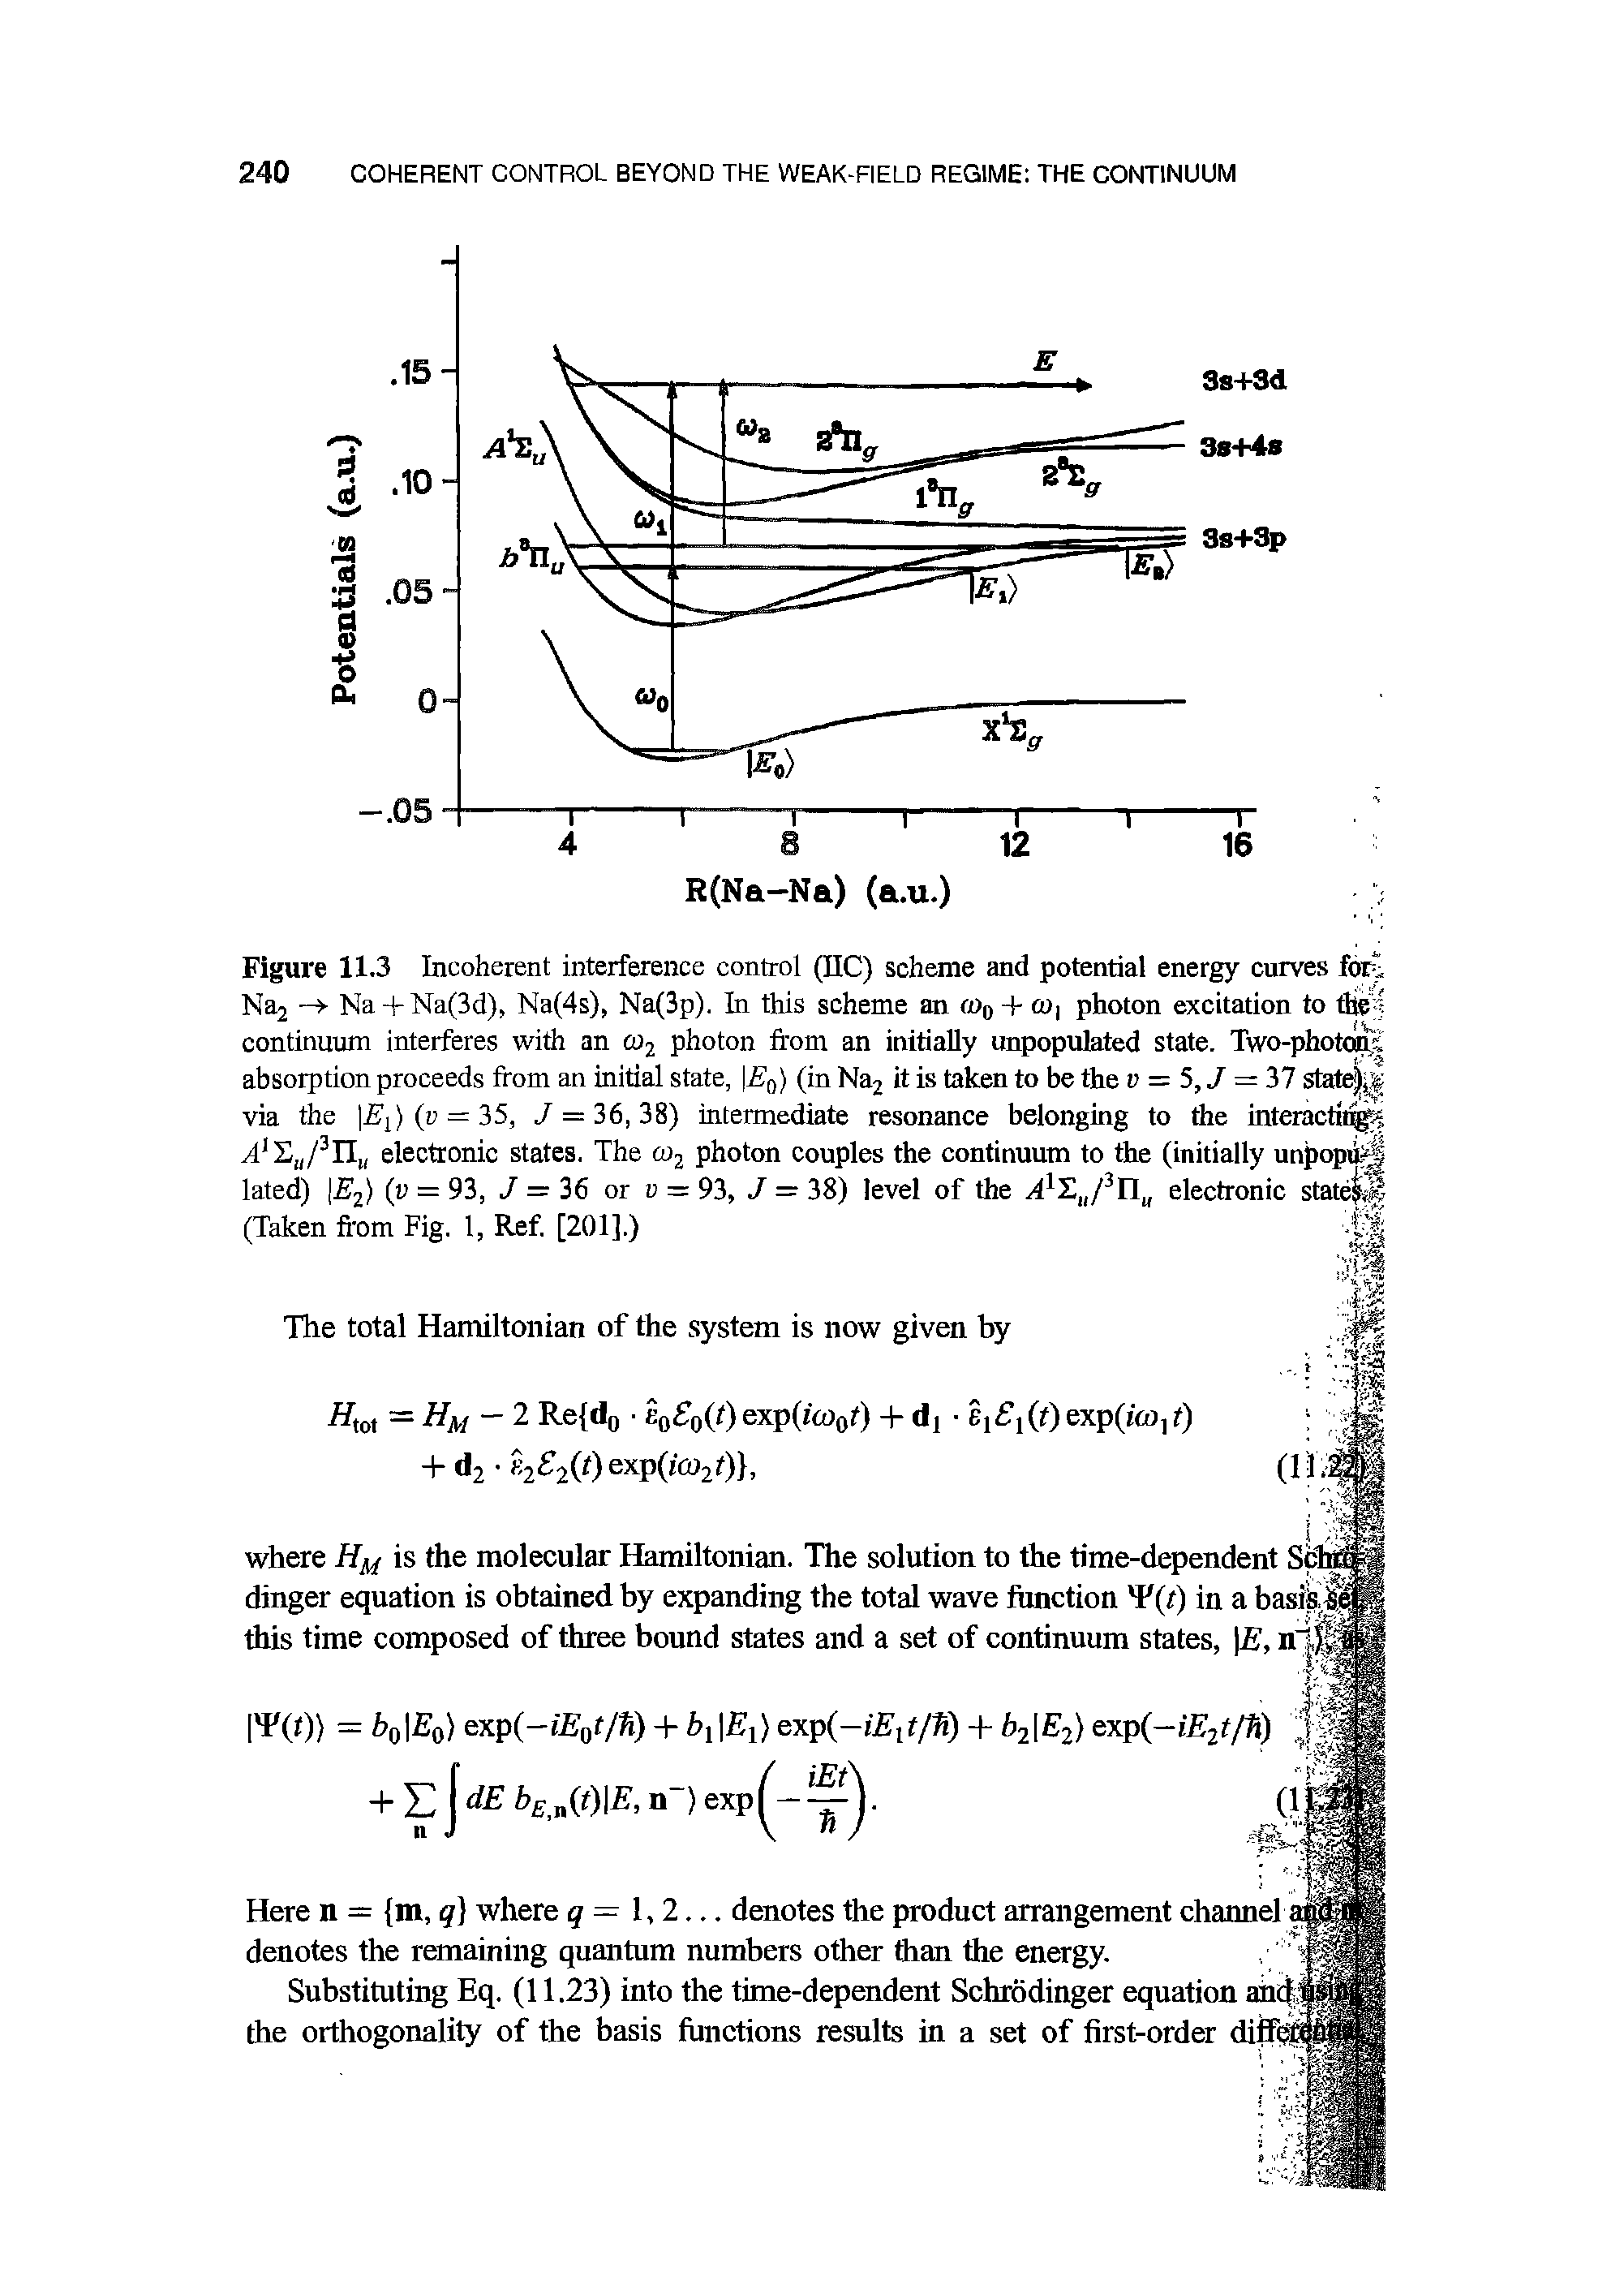 Figure 11.3 Incoherent interference control (IIC) scheme and potential energy curves fori, Na2 - Na + Na(3d), Na(4s), Na(3p). In this scheme an (on + a), photon excitation to the continuum interferes with an co2 photon from an initially unpopulated state. Two-photons absorption proceeds from an initial state, 0) (in Na2 it is taken to be the v = 5, 7 = 37 state), via the ]is1) (u = 35, 7 = 36,38) intermediate resonance belonging to the interacting, S /3n electronic states. The oj2 photon couples the continuum to the (initially unpopusf lated) E2) (v = 93, J — 36 or u = 93, 7 = 38) level of the lSll/3ril, electronic state j (Taken from Fig. 1, Ref. [201].). feg...